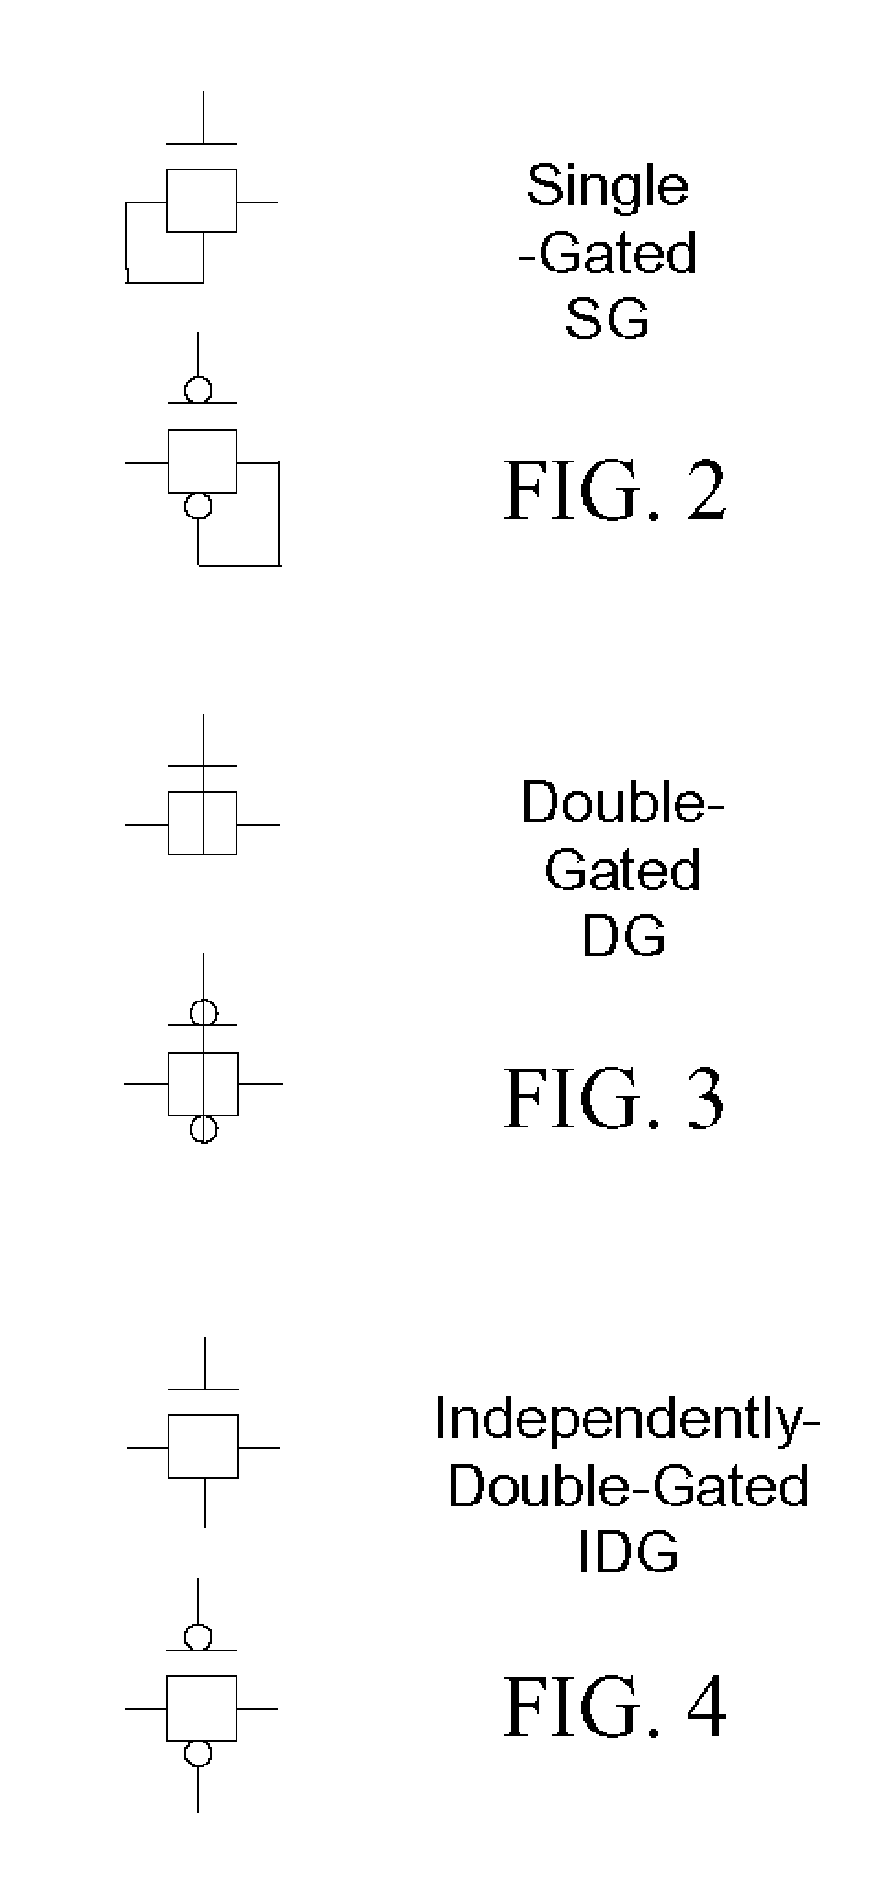 Independently-double-gated field effect transistor